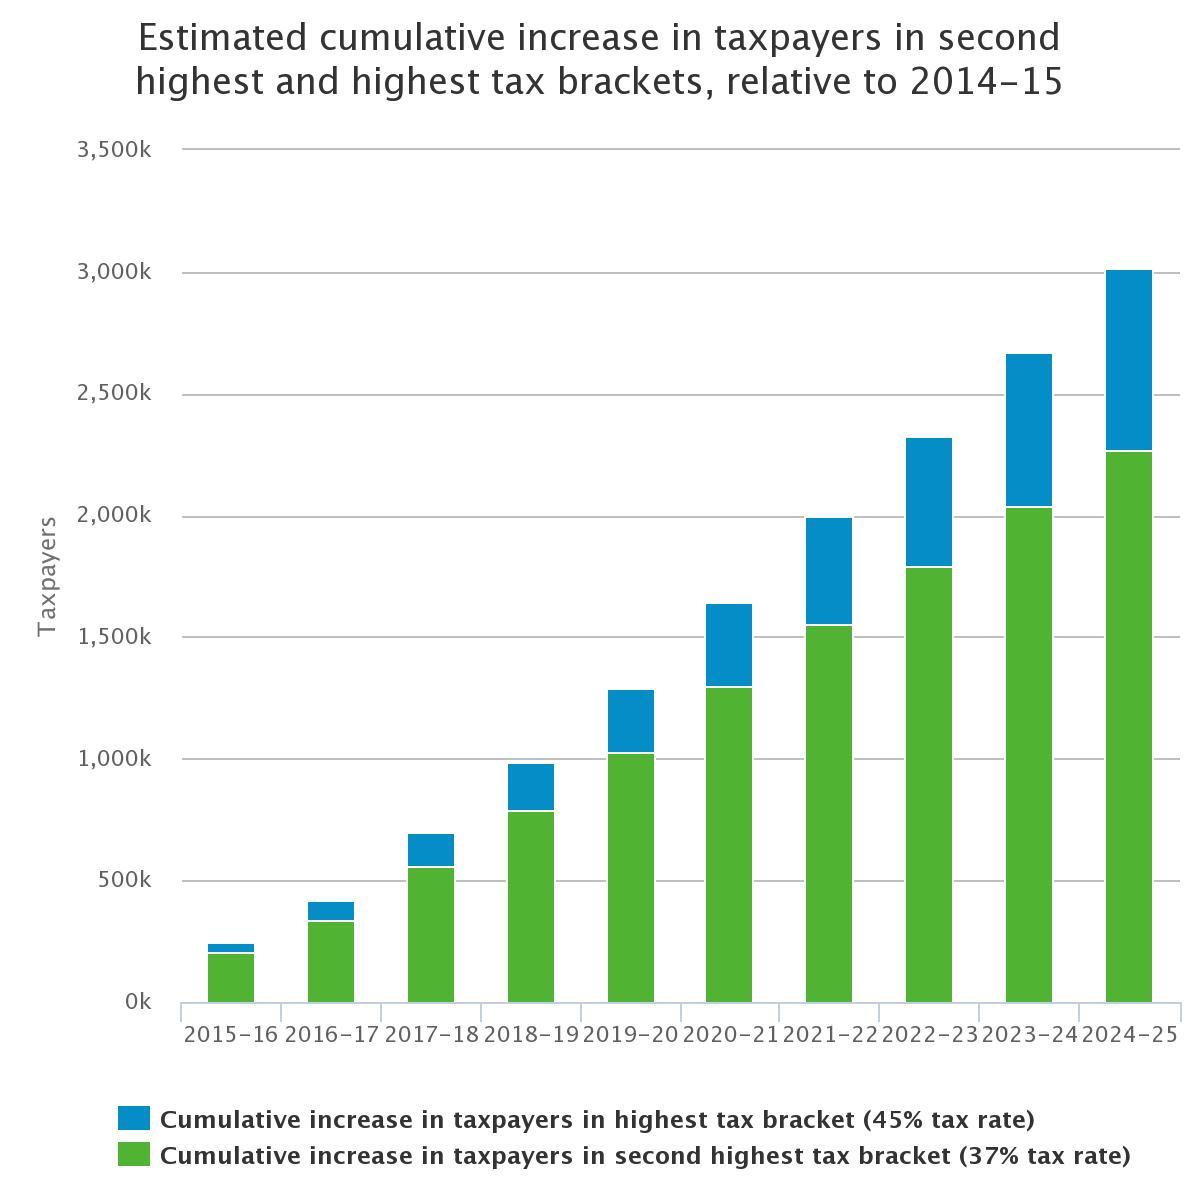 Estimated cumulative increase in second highest and highest tax brakets, relative to 2014-15